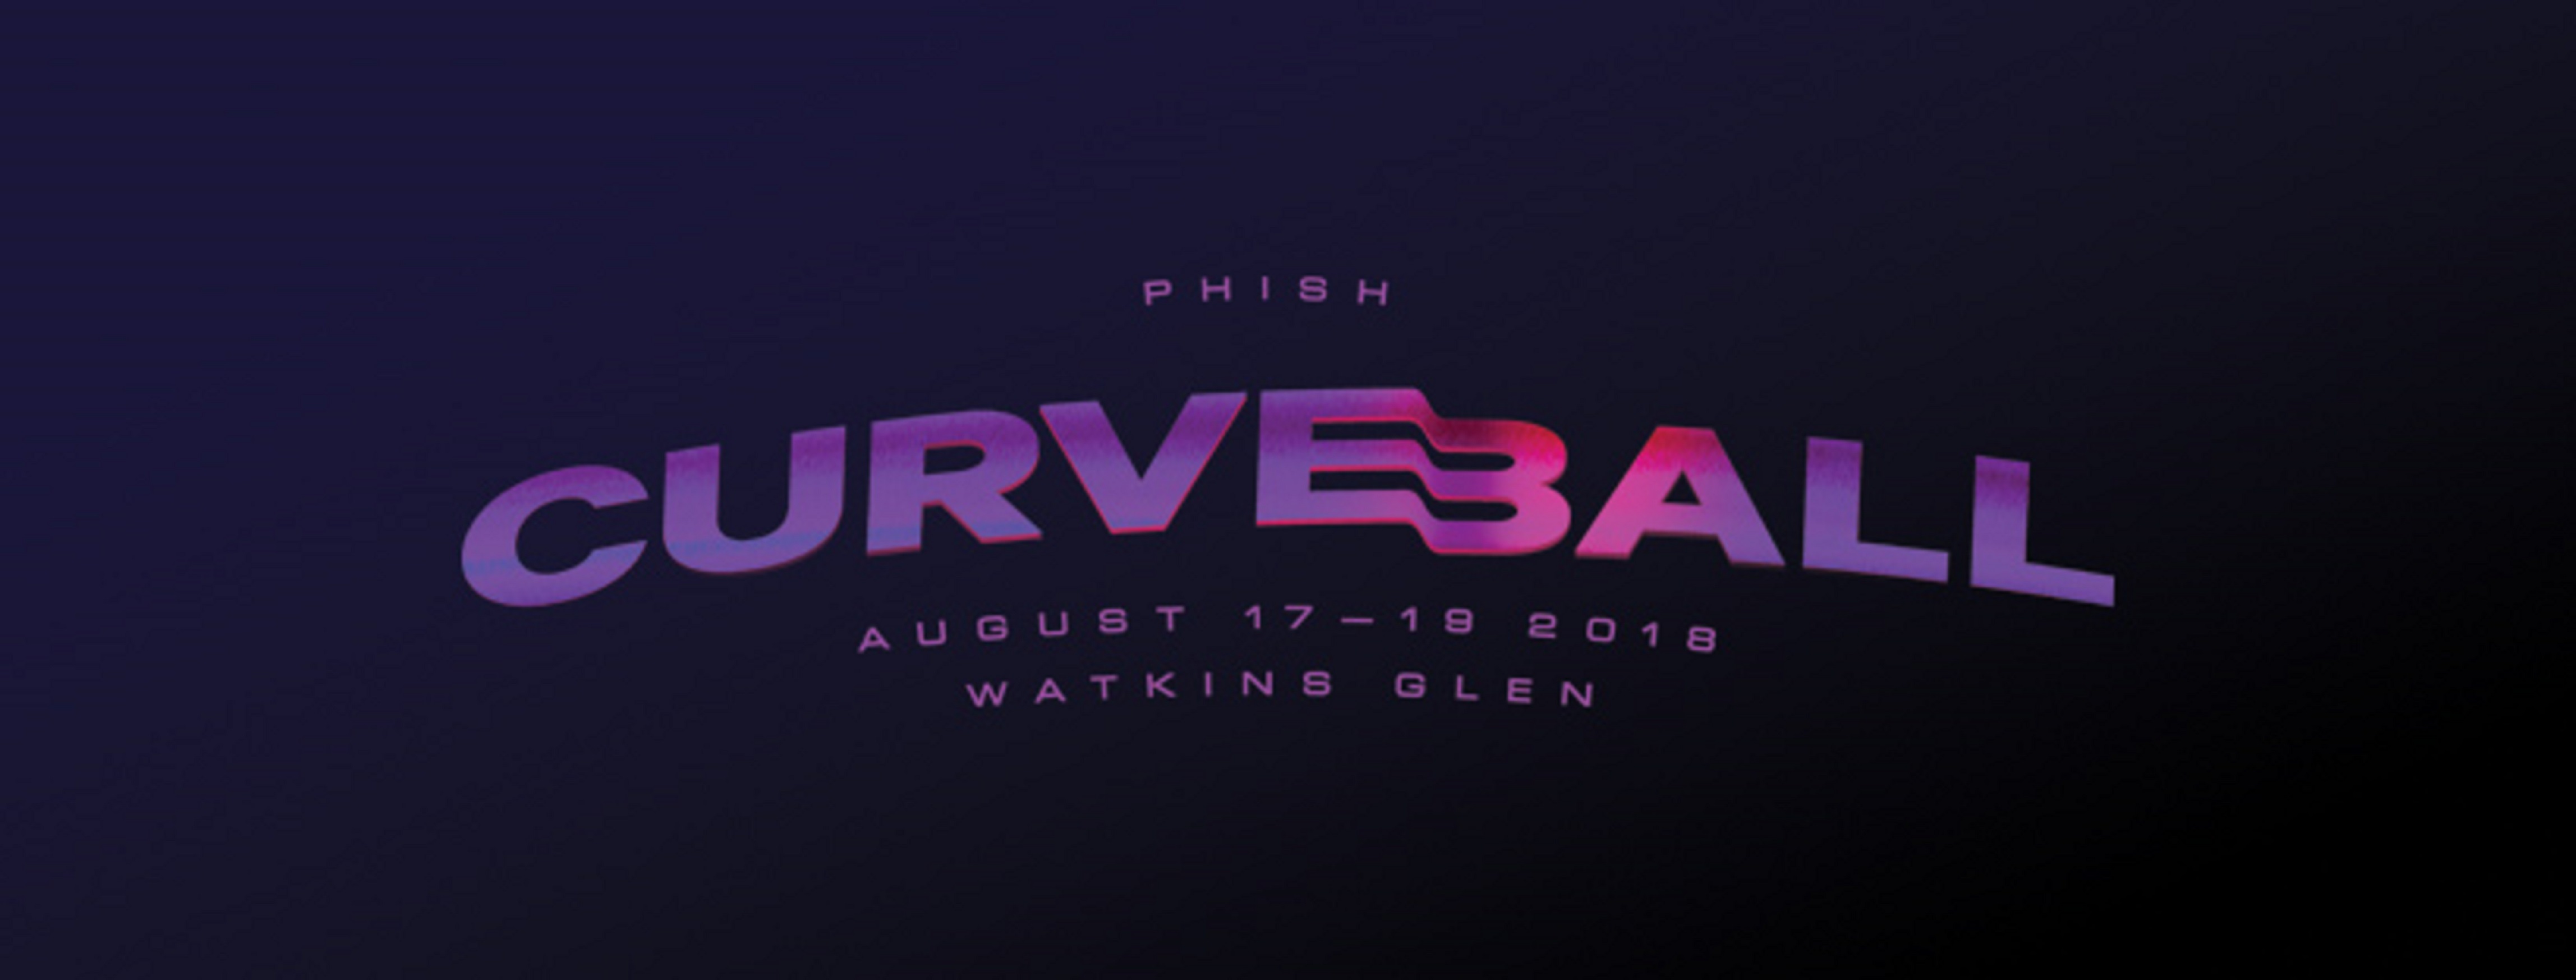 CURVEBALL FORCED TO CANCEL